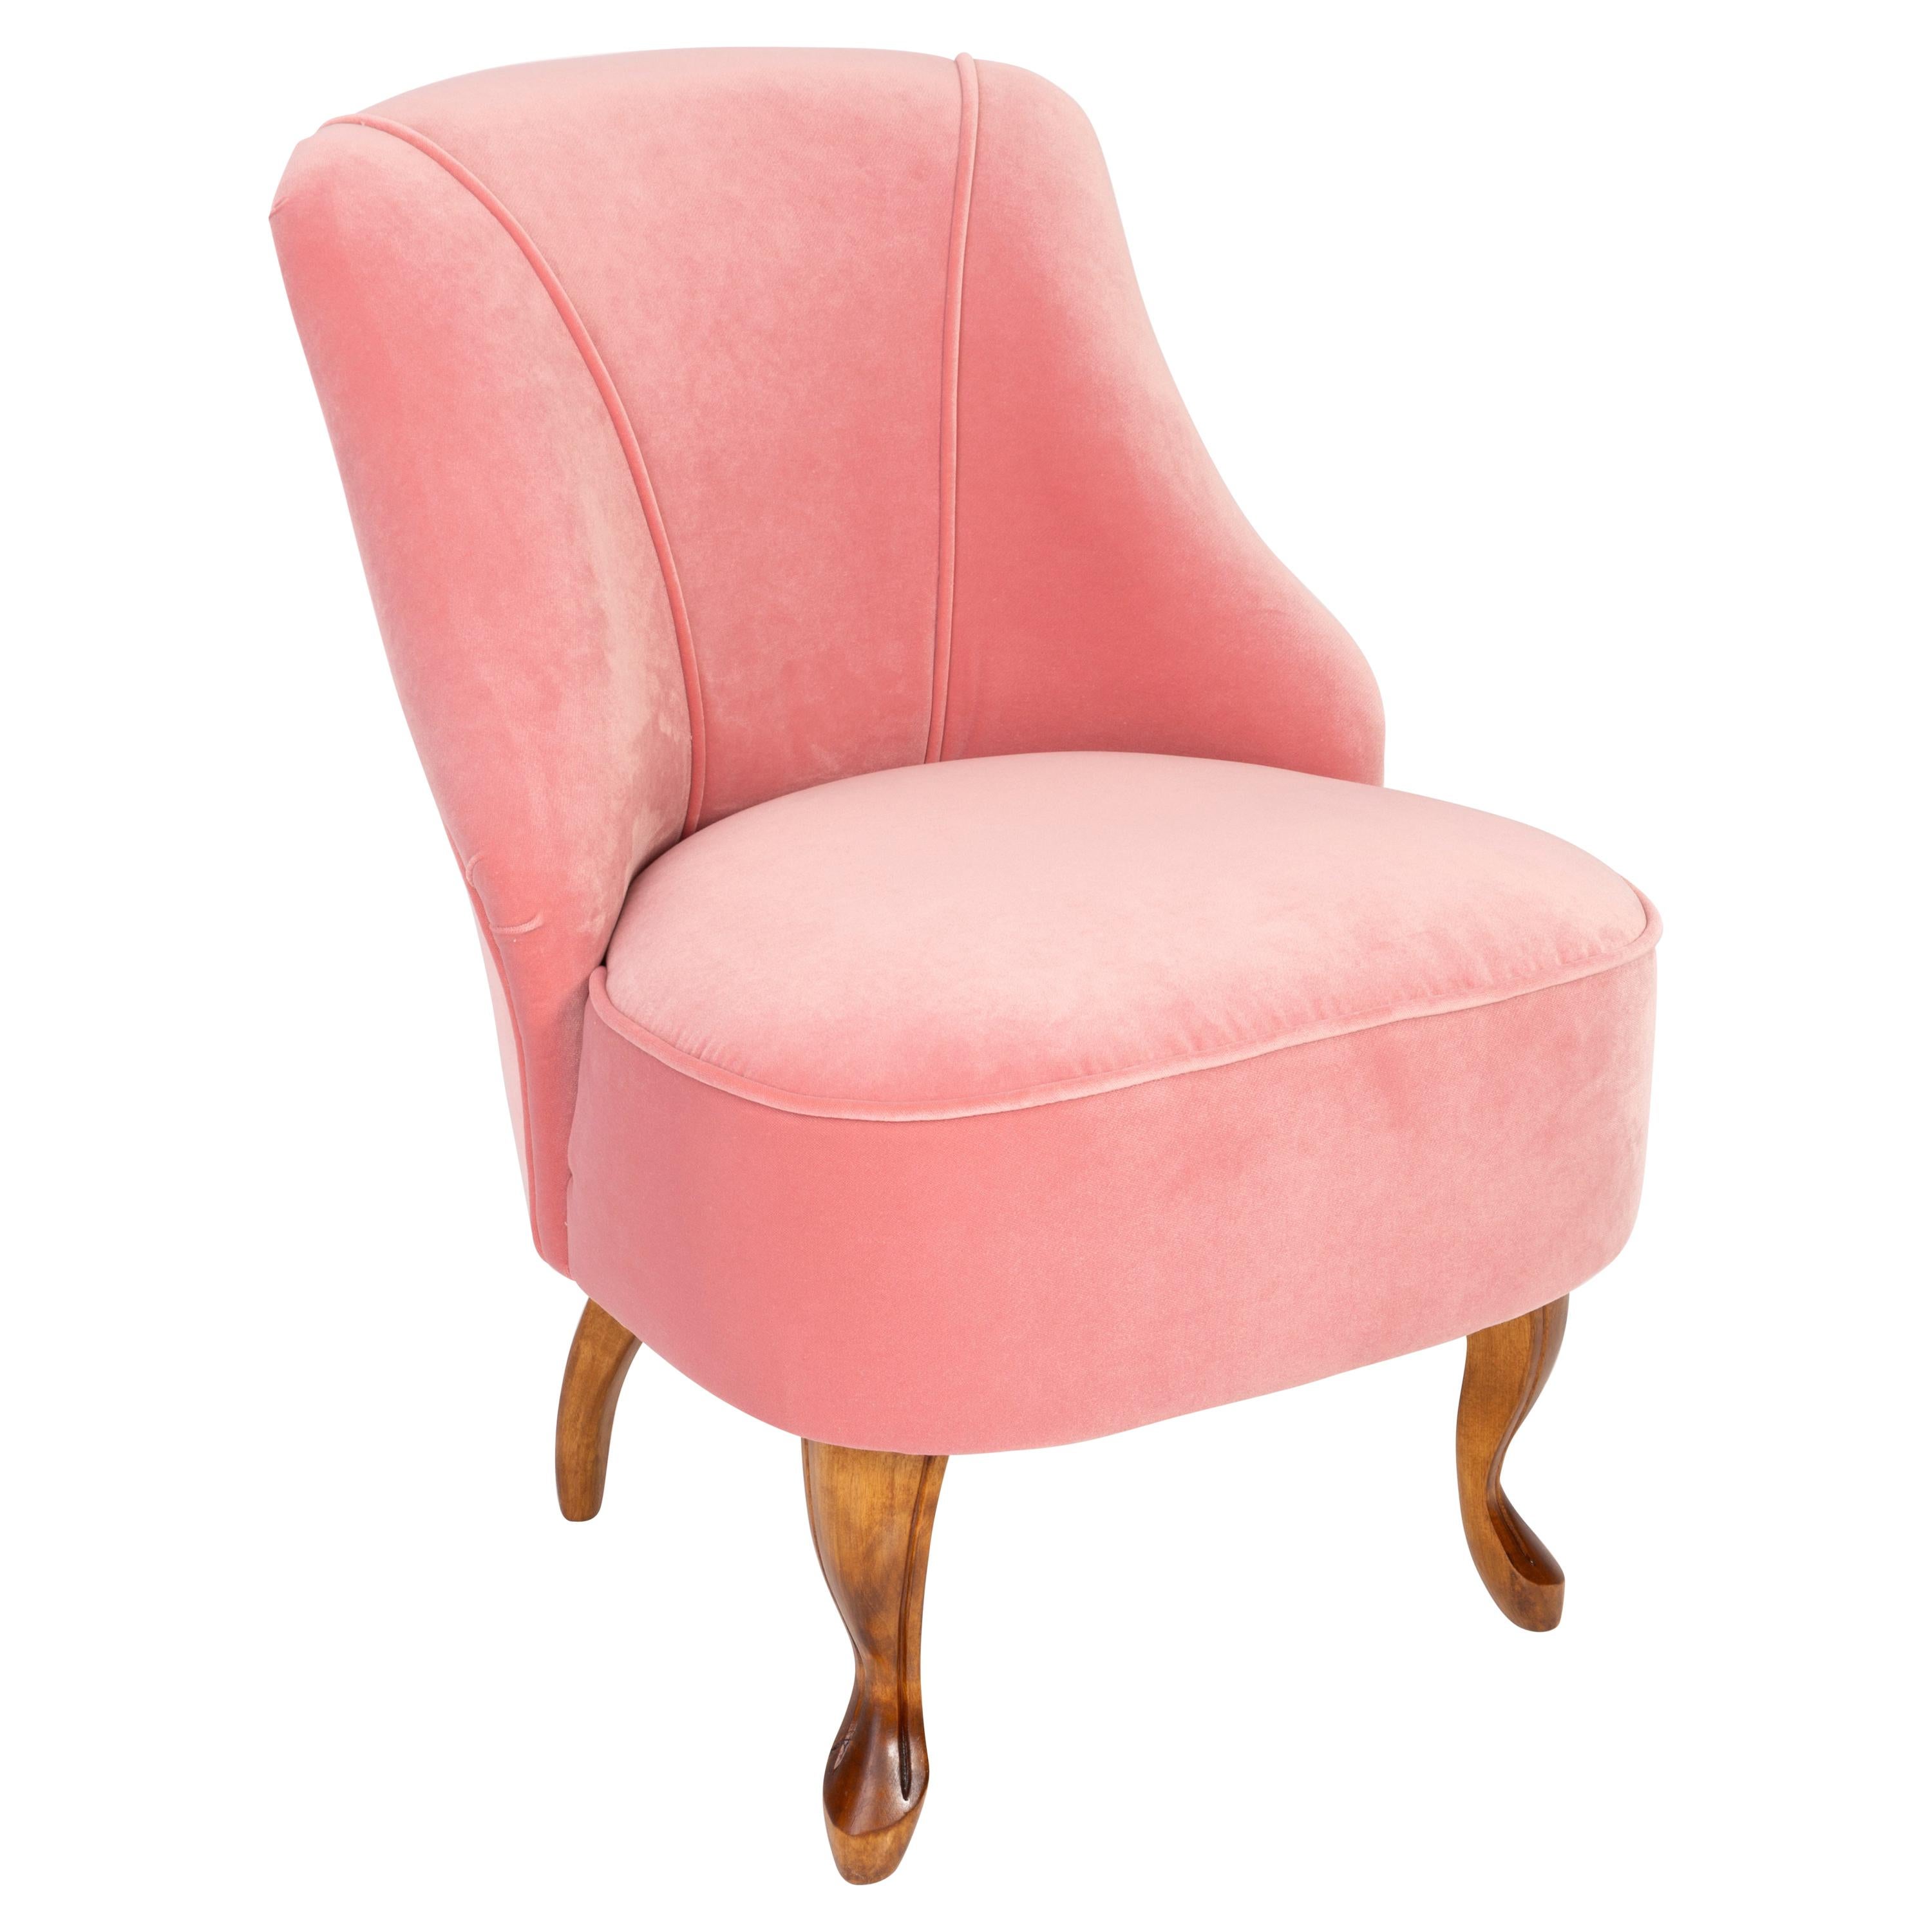 20th Century Art Deco Baby Pink Armchair, 1950s For Sale